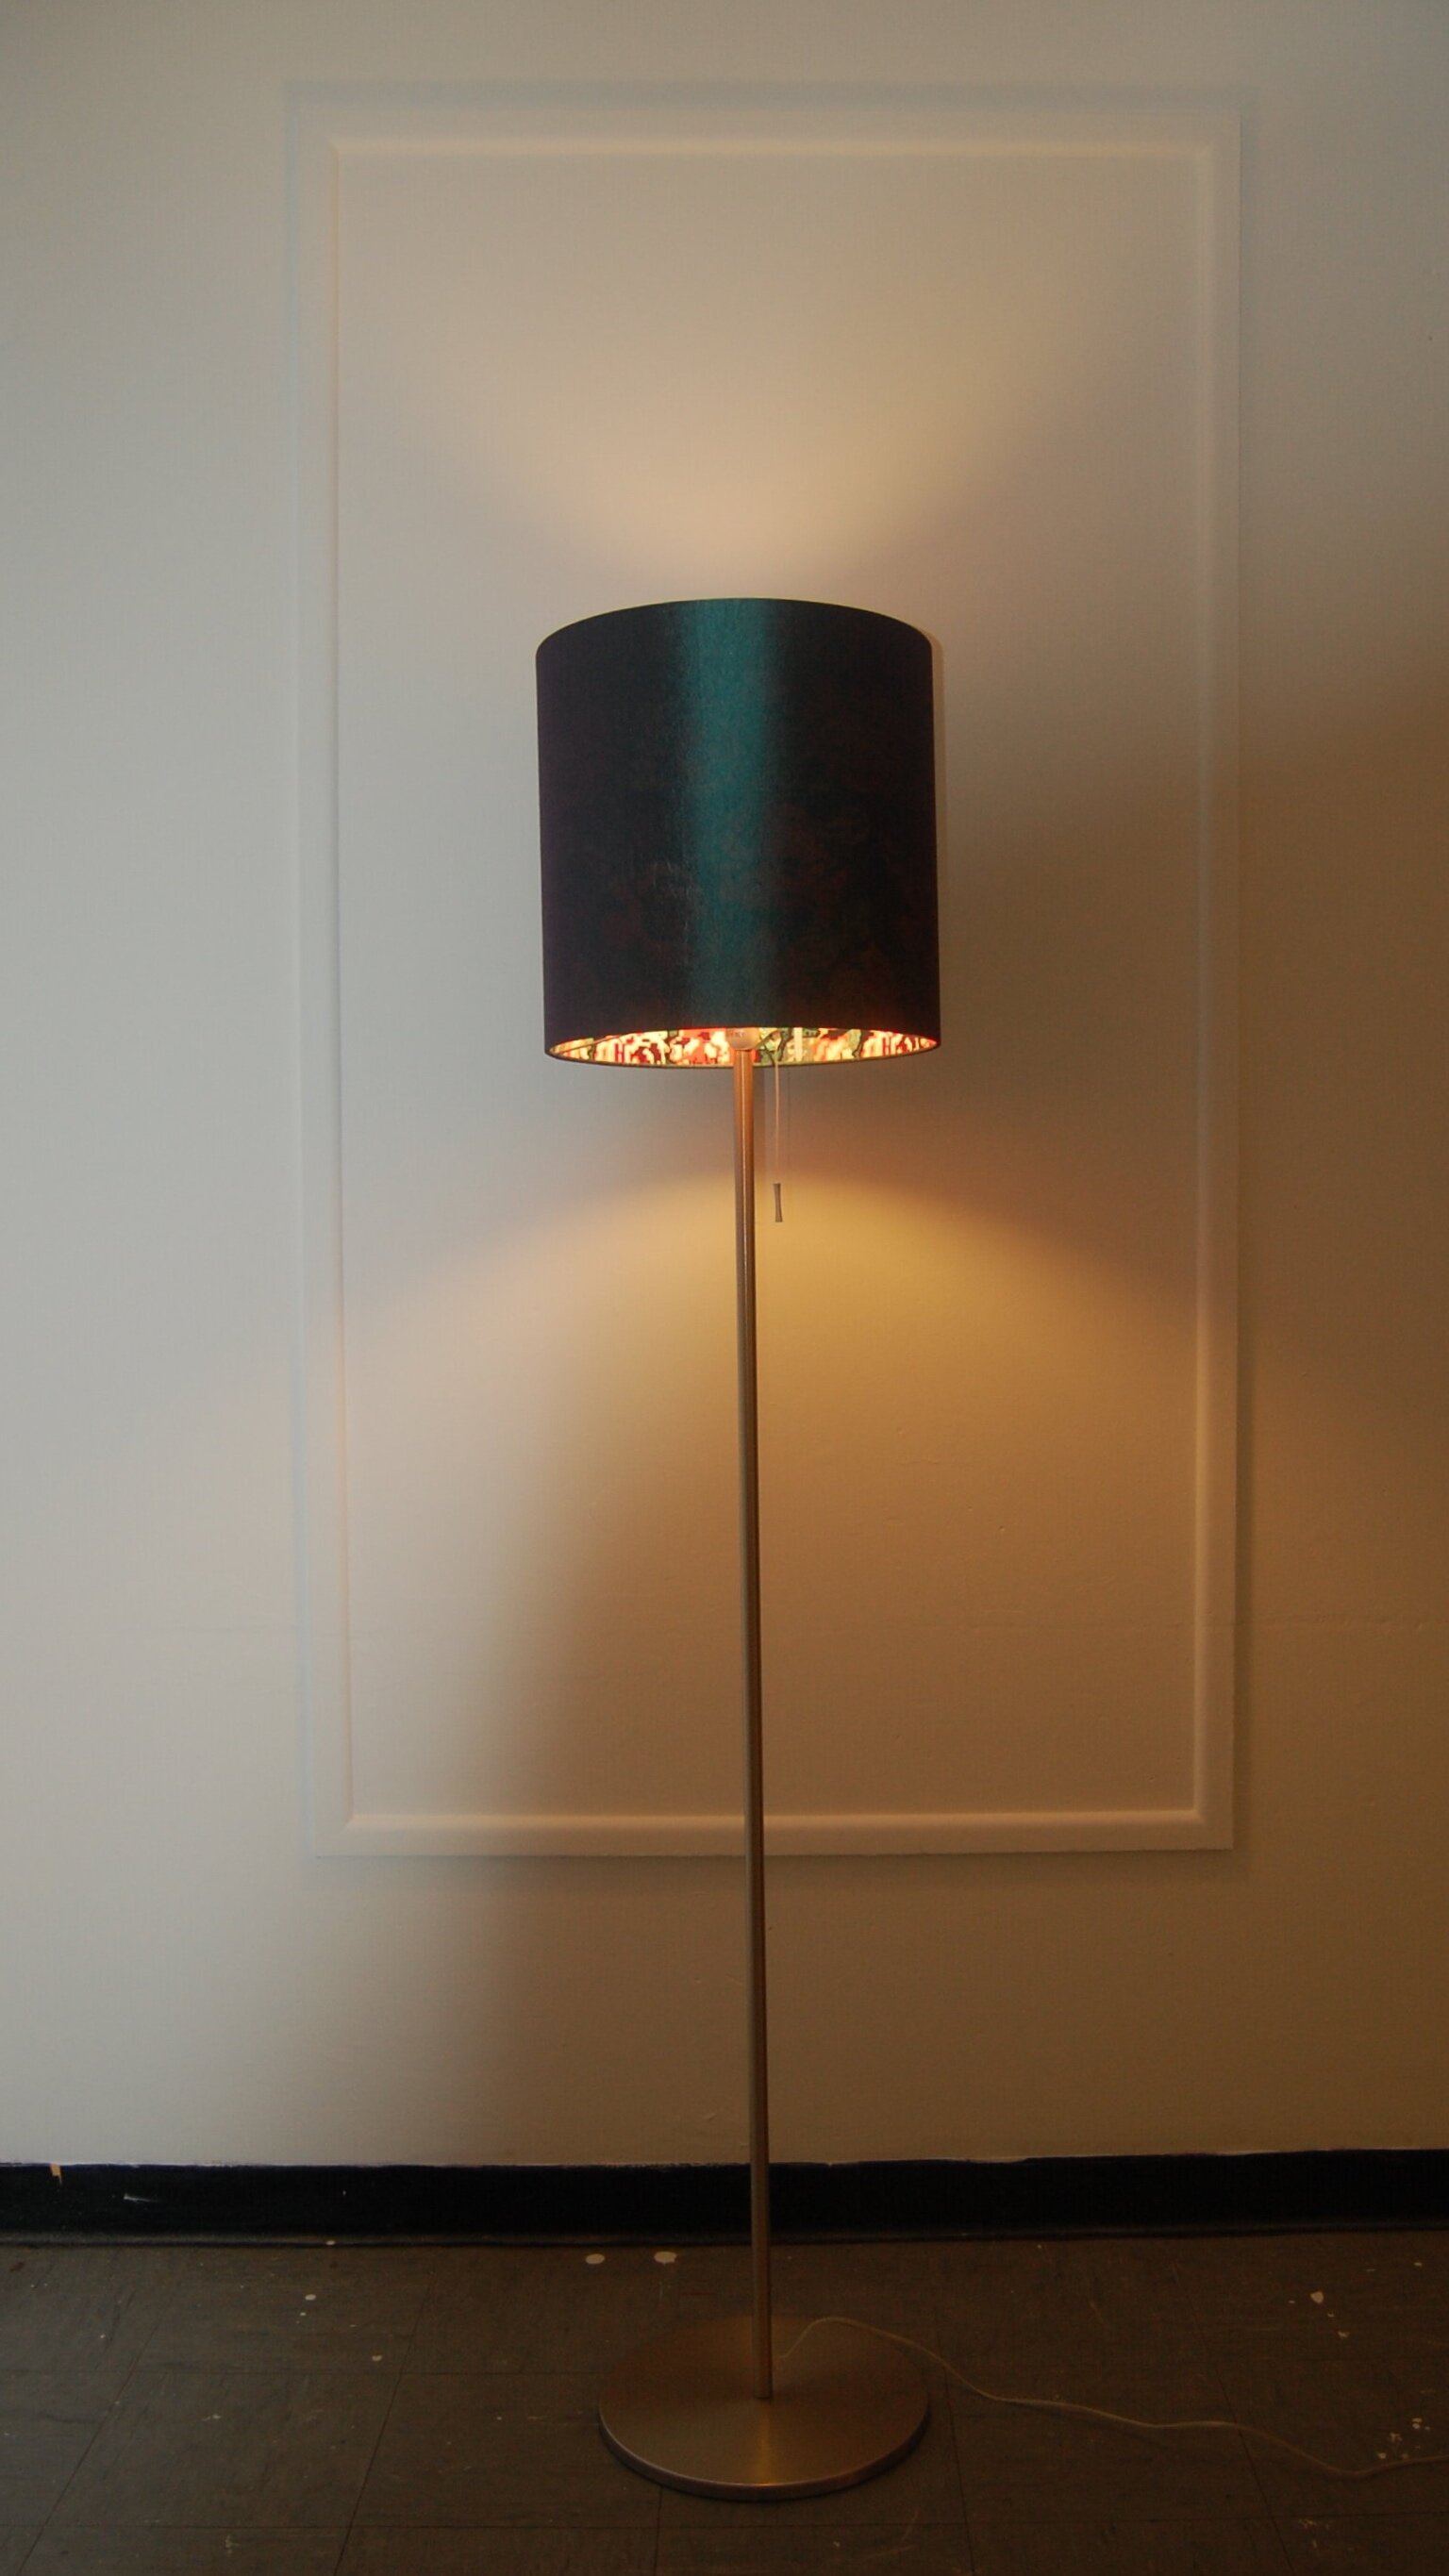 Bespoke Floor Lamp Shades And Standard, Extra Tall Floor Lamps Uk